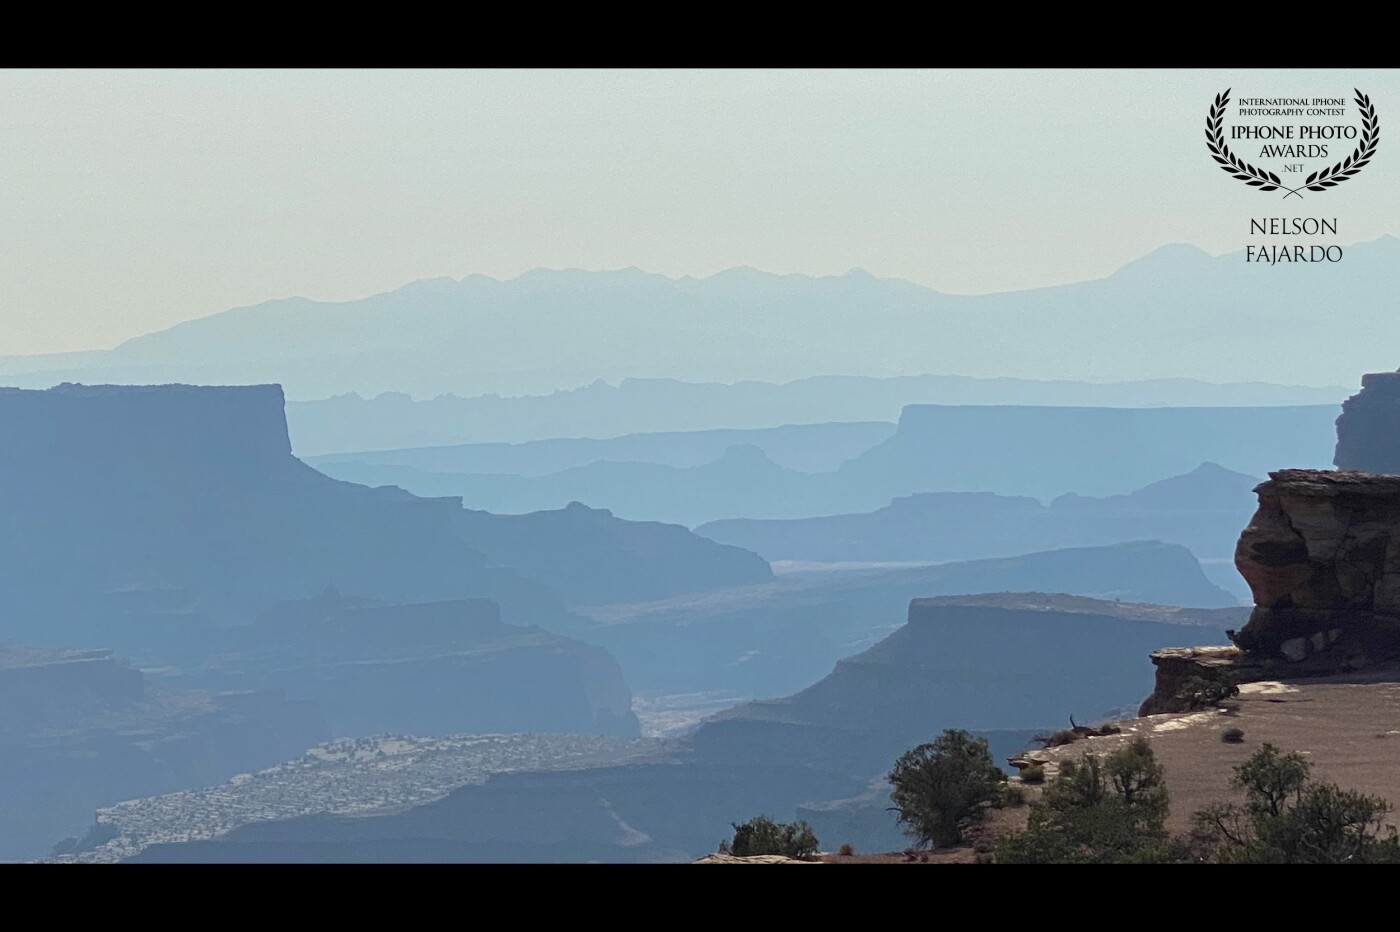 The gradient of the canyons from the Canyonlands, in Island in the Sky during an early morning walk. Breathtakingly beautiful and picturesque.